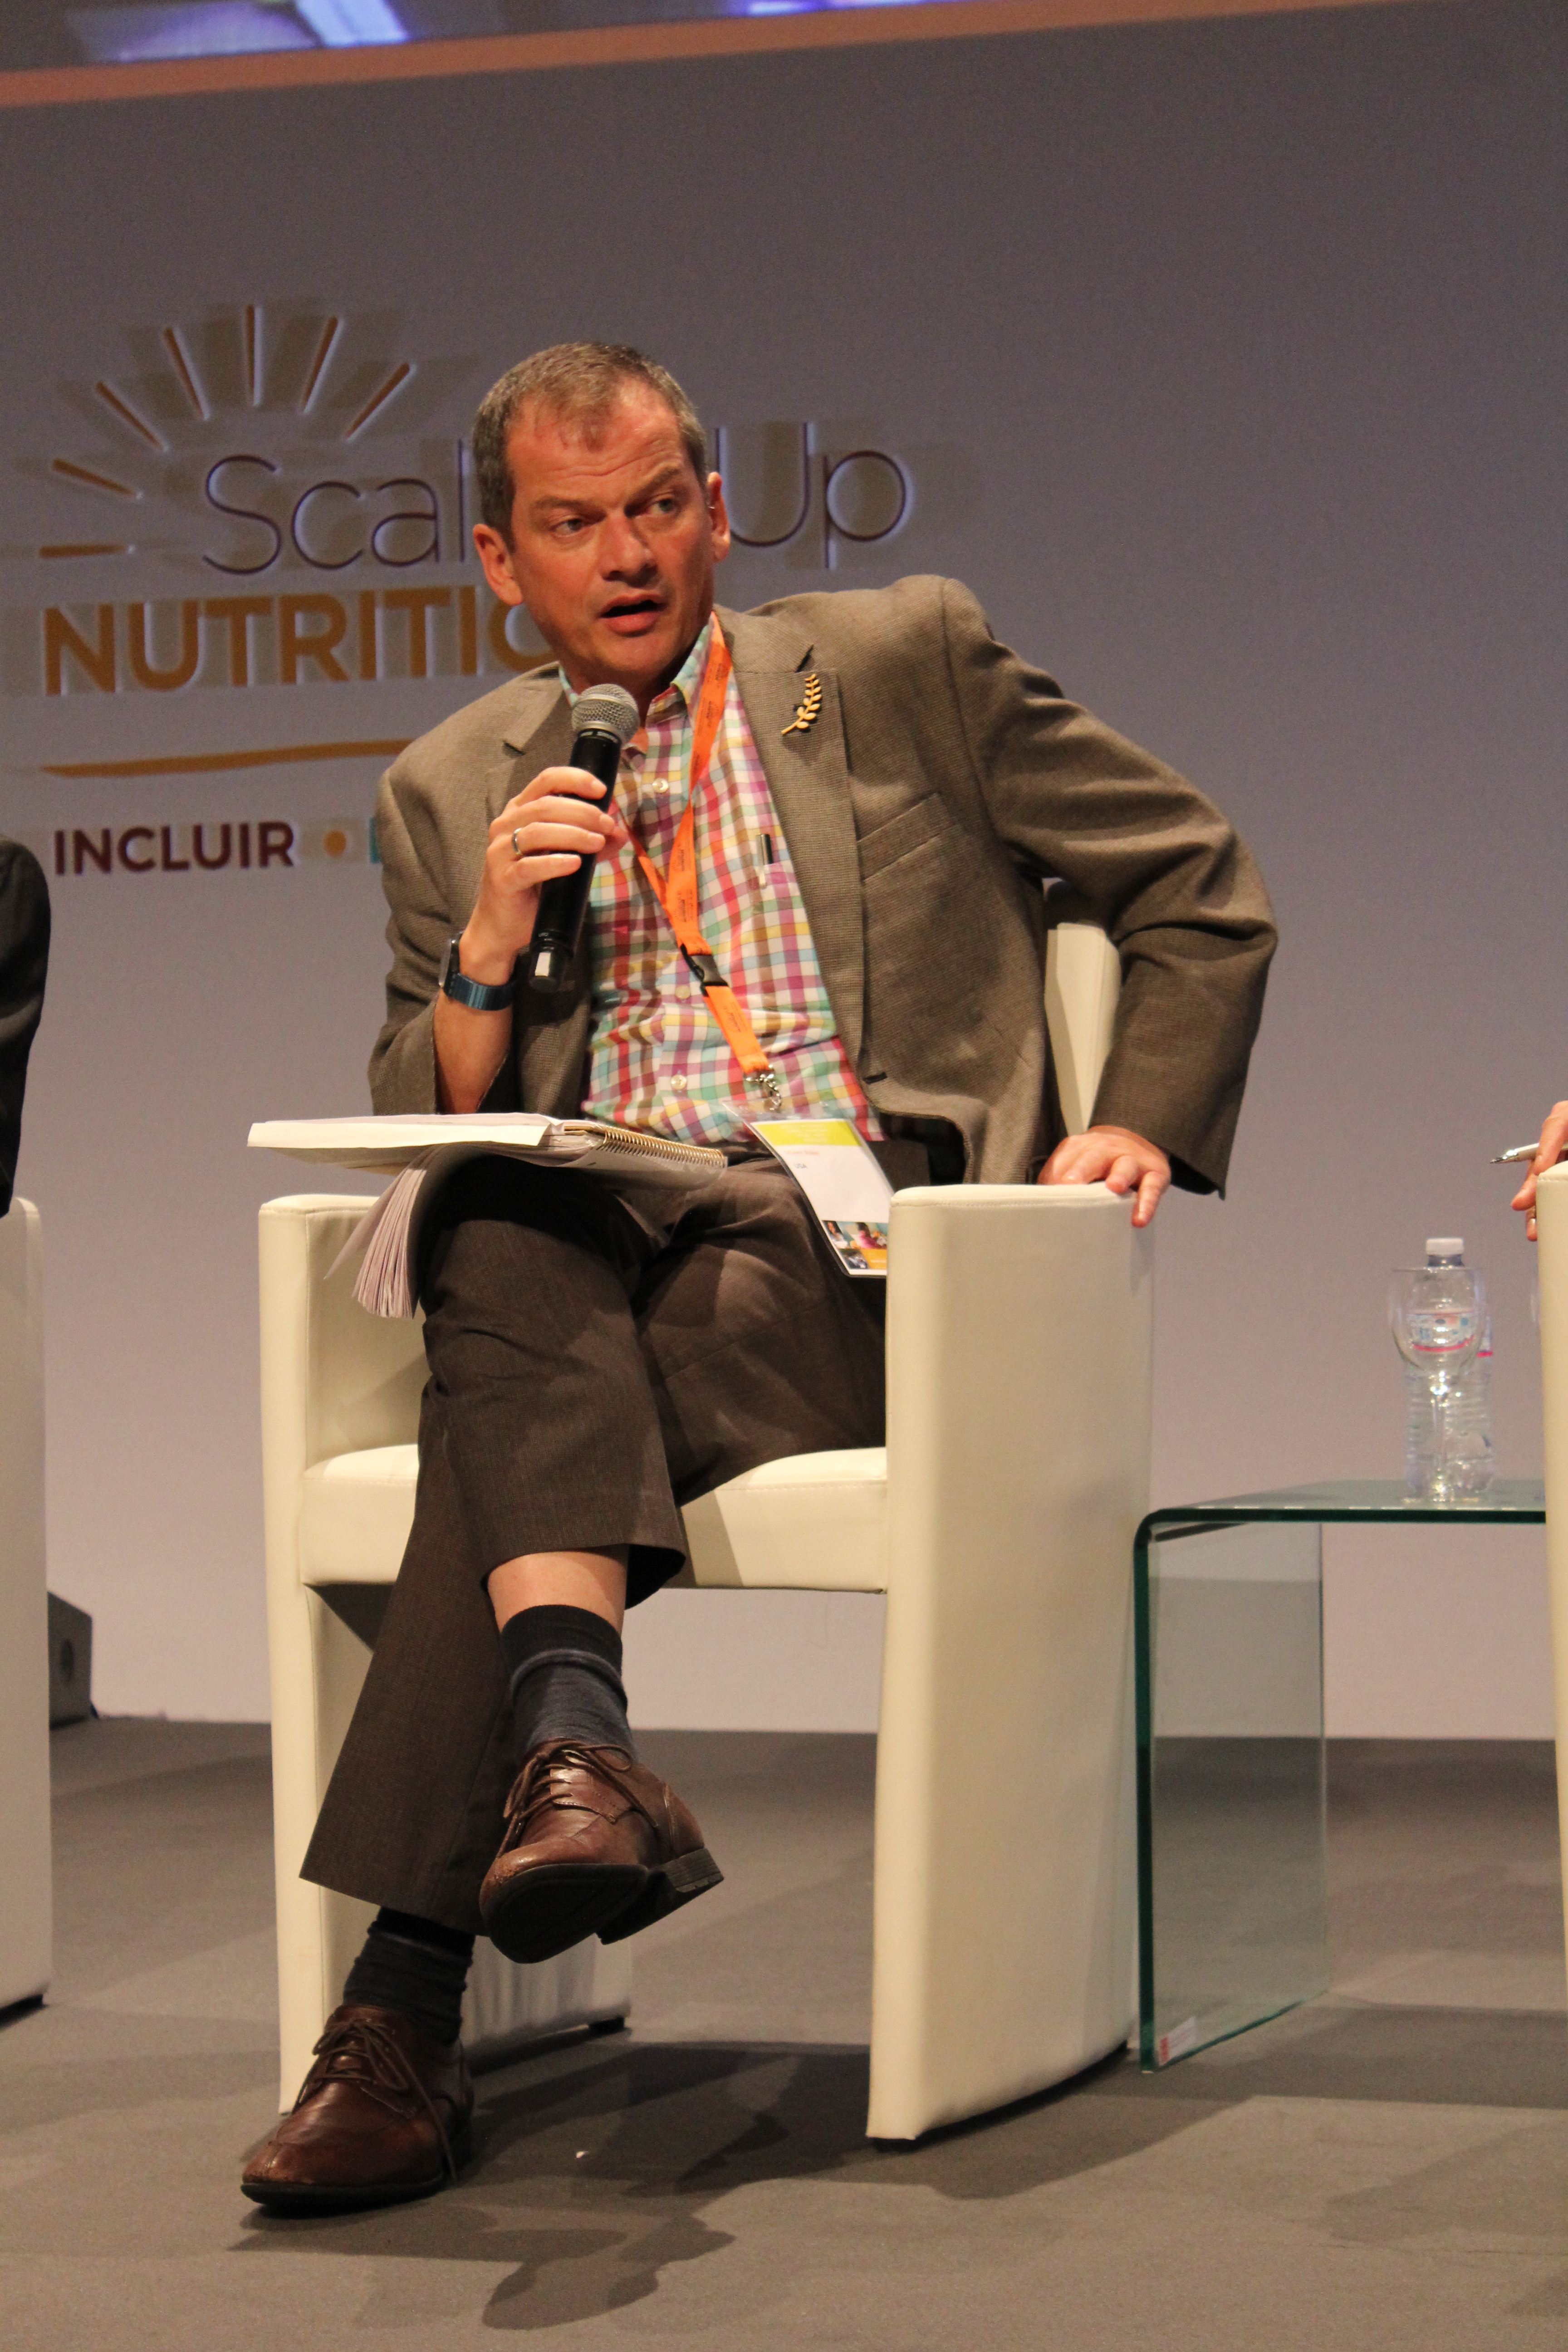 Stronger political commitment needed to reduce malnutrition, says Gates Foundation director